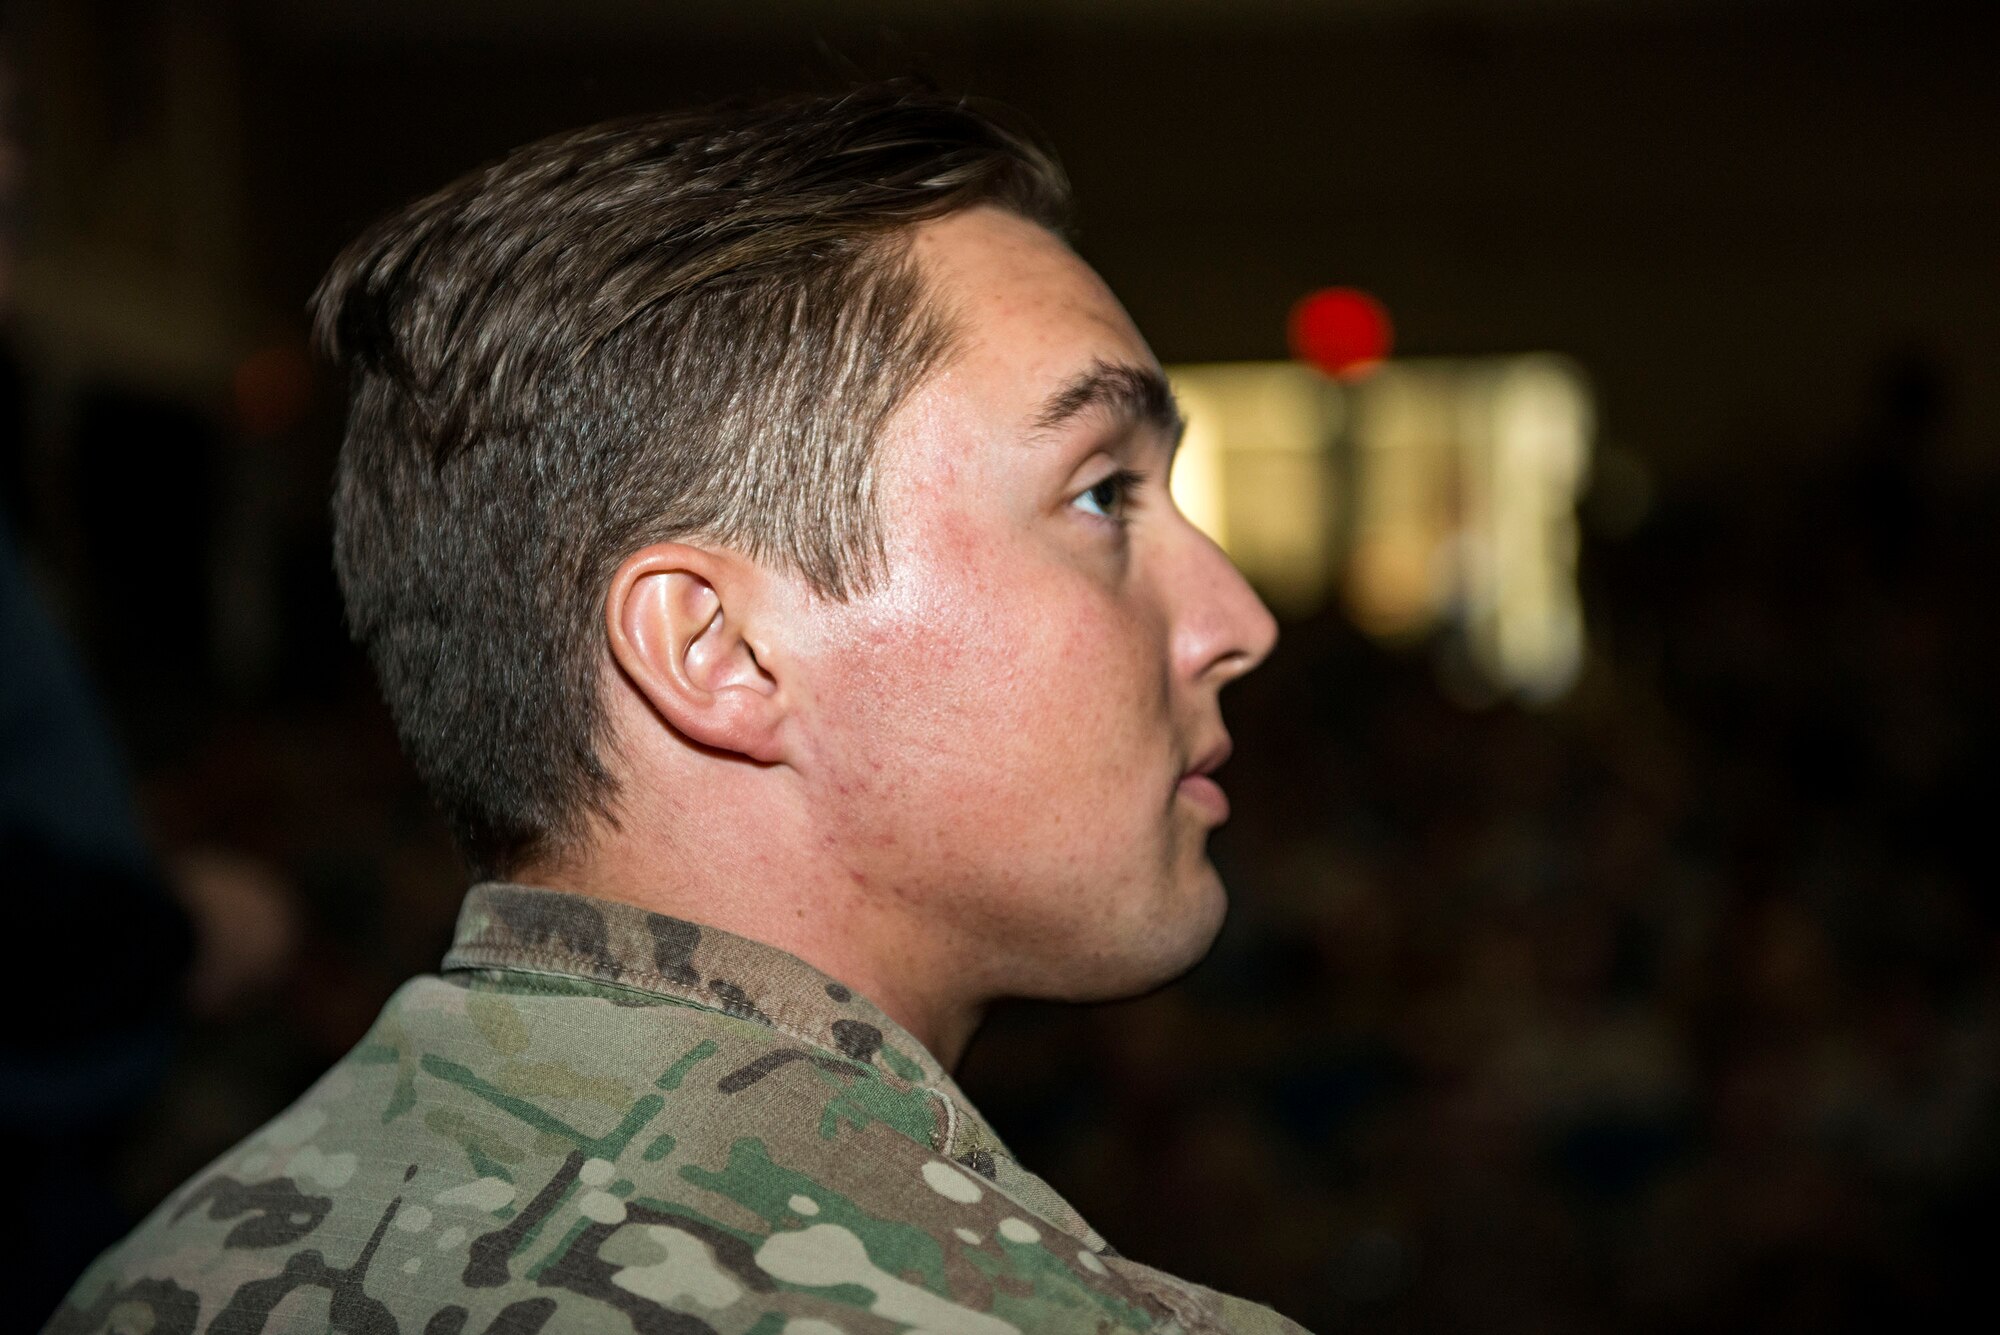 Senior Airman Cody Stoltenburg, 71st Rescue Squadron intelligence analyst, listens to a speech by safety training coordinators during a Street Smart presentation, Jan. 2, 2018, at Moody Air Force Base, Ga. The presenters utilized Airmen to simulate the potential results of drunk driving. Street Smart is a safety program designed to emphasize the dangers of making poor decisions and then driving a vehicle. (U.S. Air Force photo by Airman 1st Class Erick Requadt)